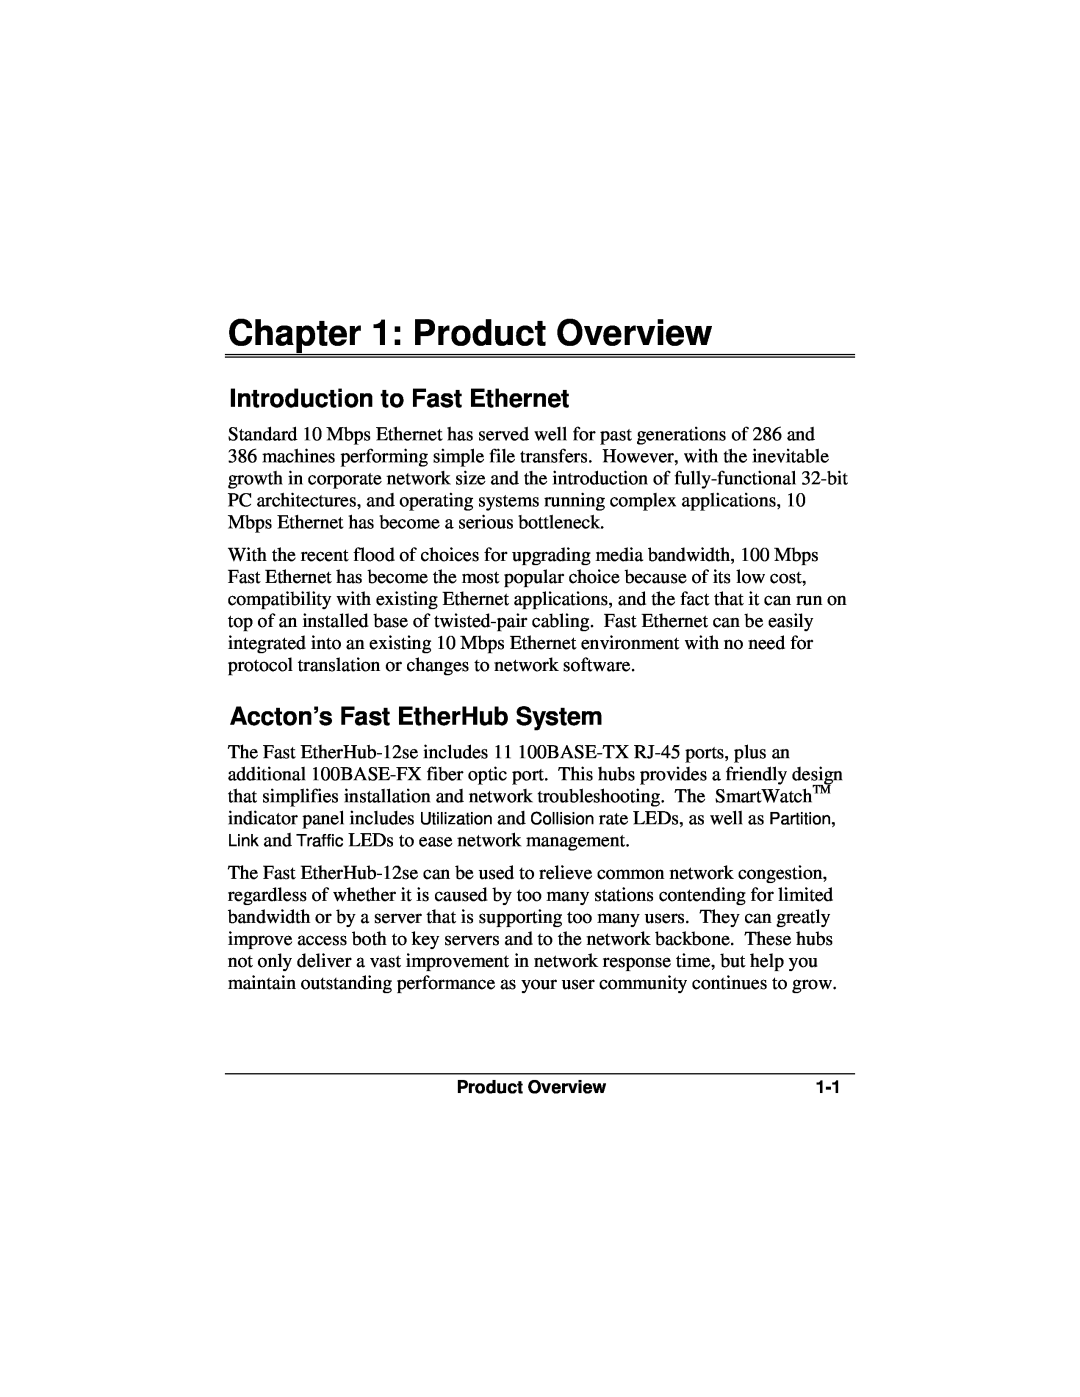 Accton Technology 12se manual Product Overview, Introduction to Fast Ethernet, Accton’s Fast EtherHub System 